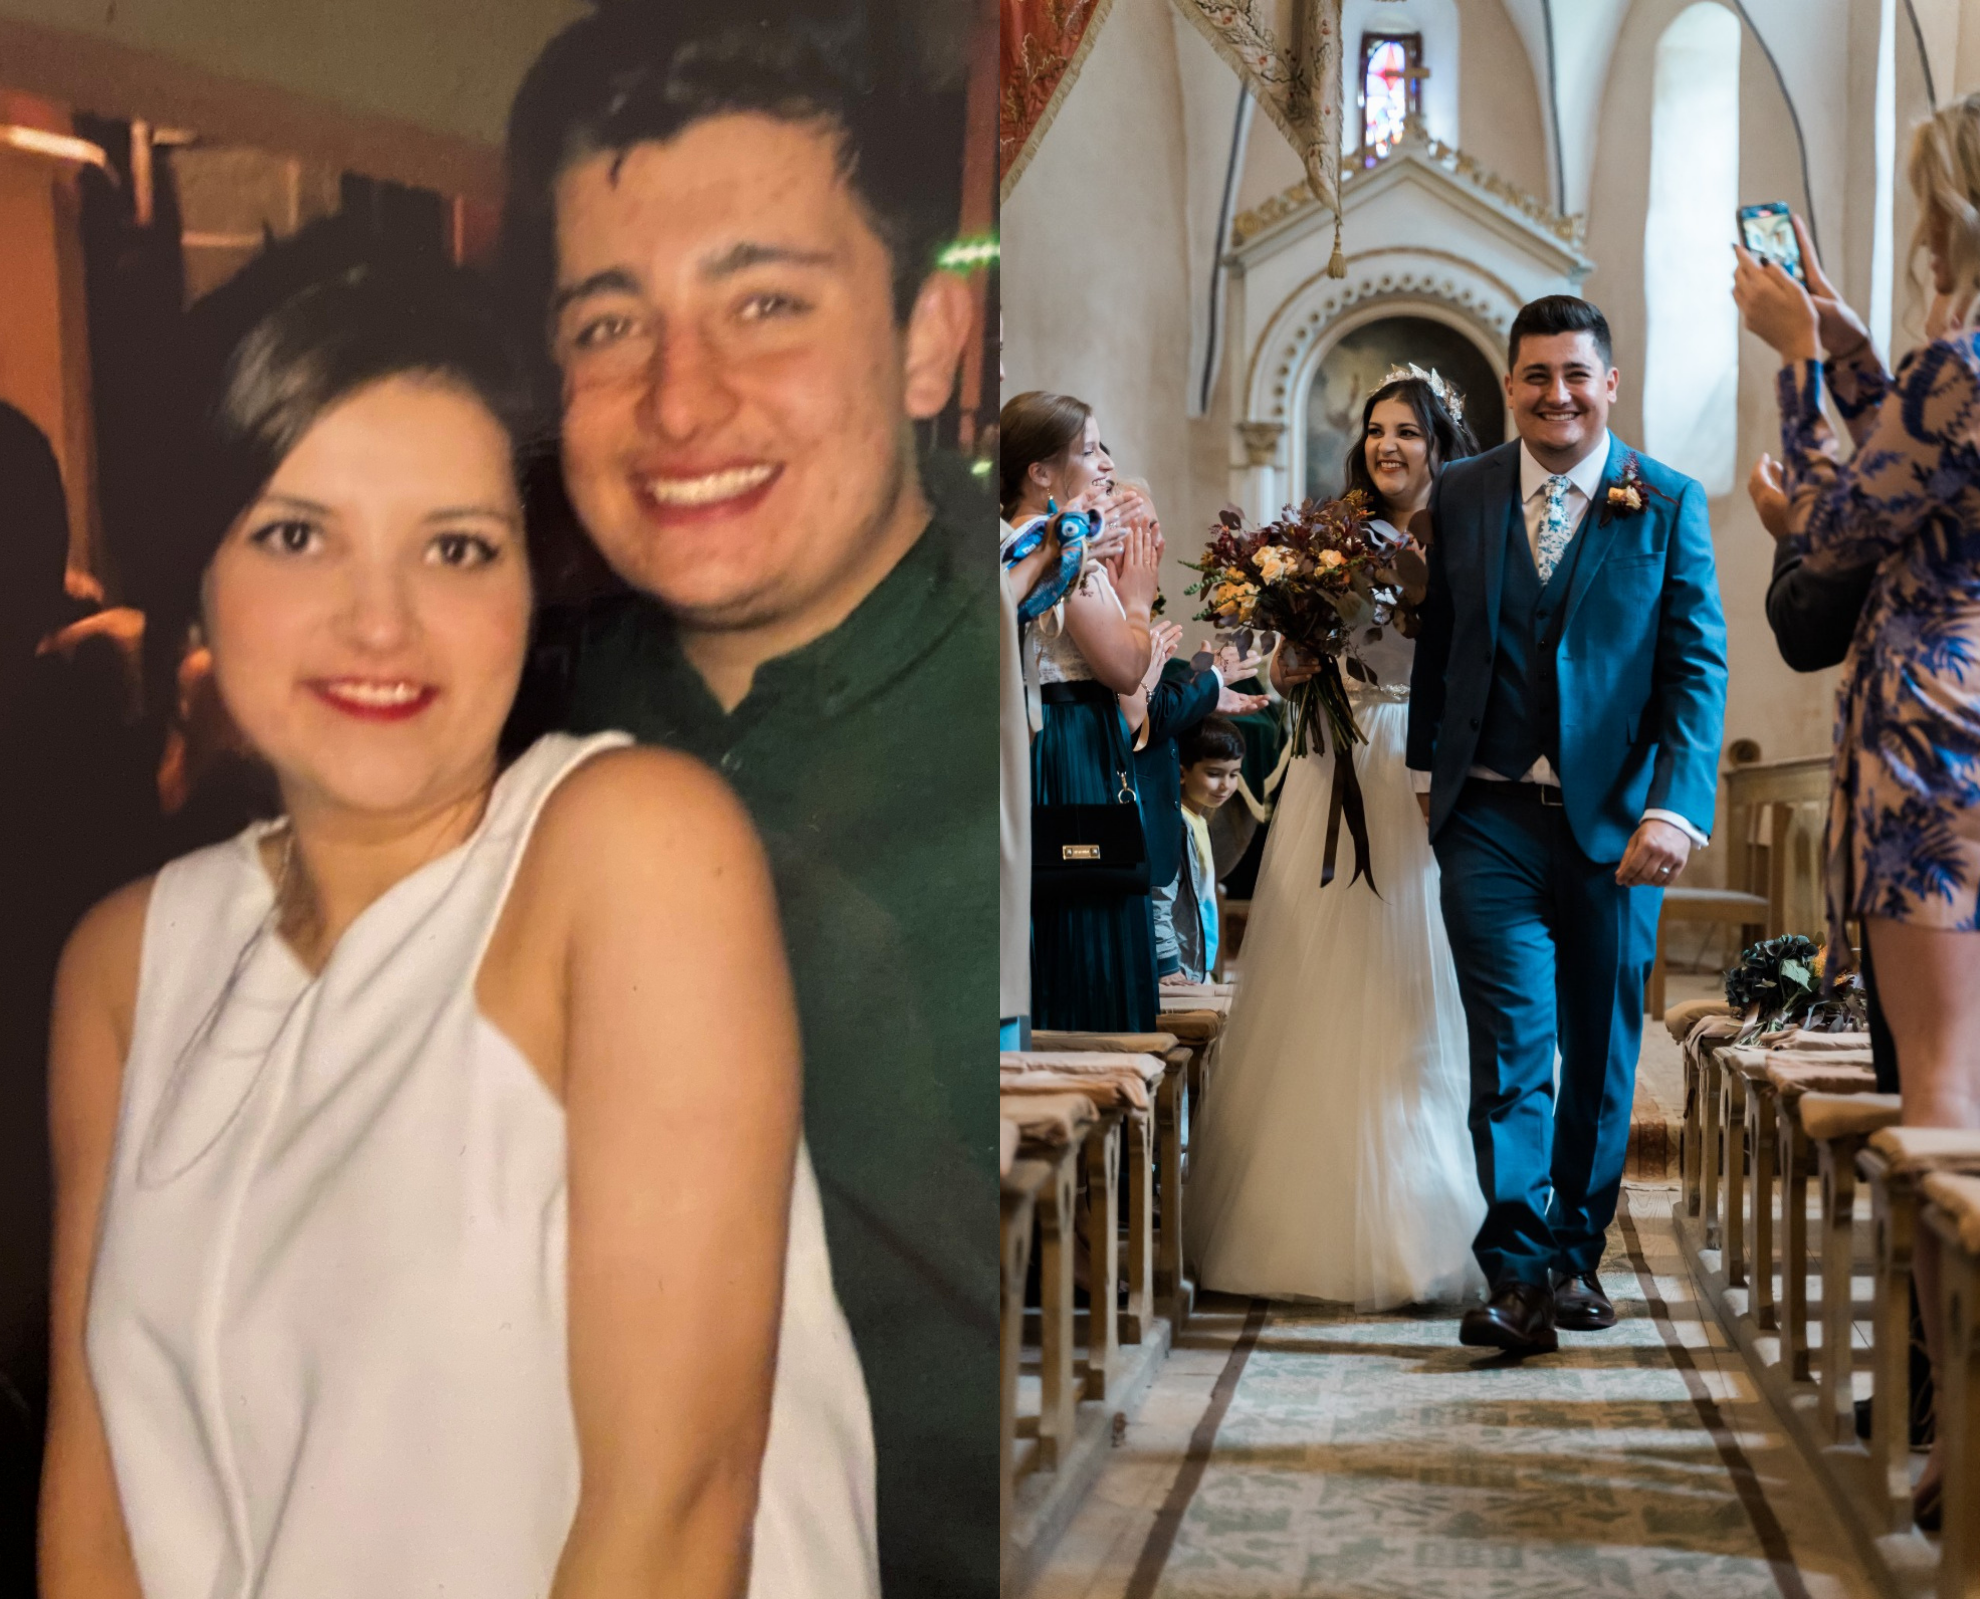 On the right, a photo of Cristina and Jack smiling on a night out at Essex. On the left, Cristina and Jack on their wedding day, walking down the aisle. 